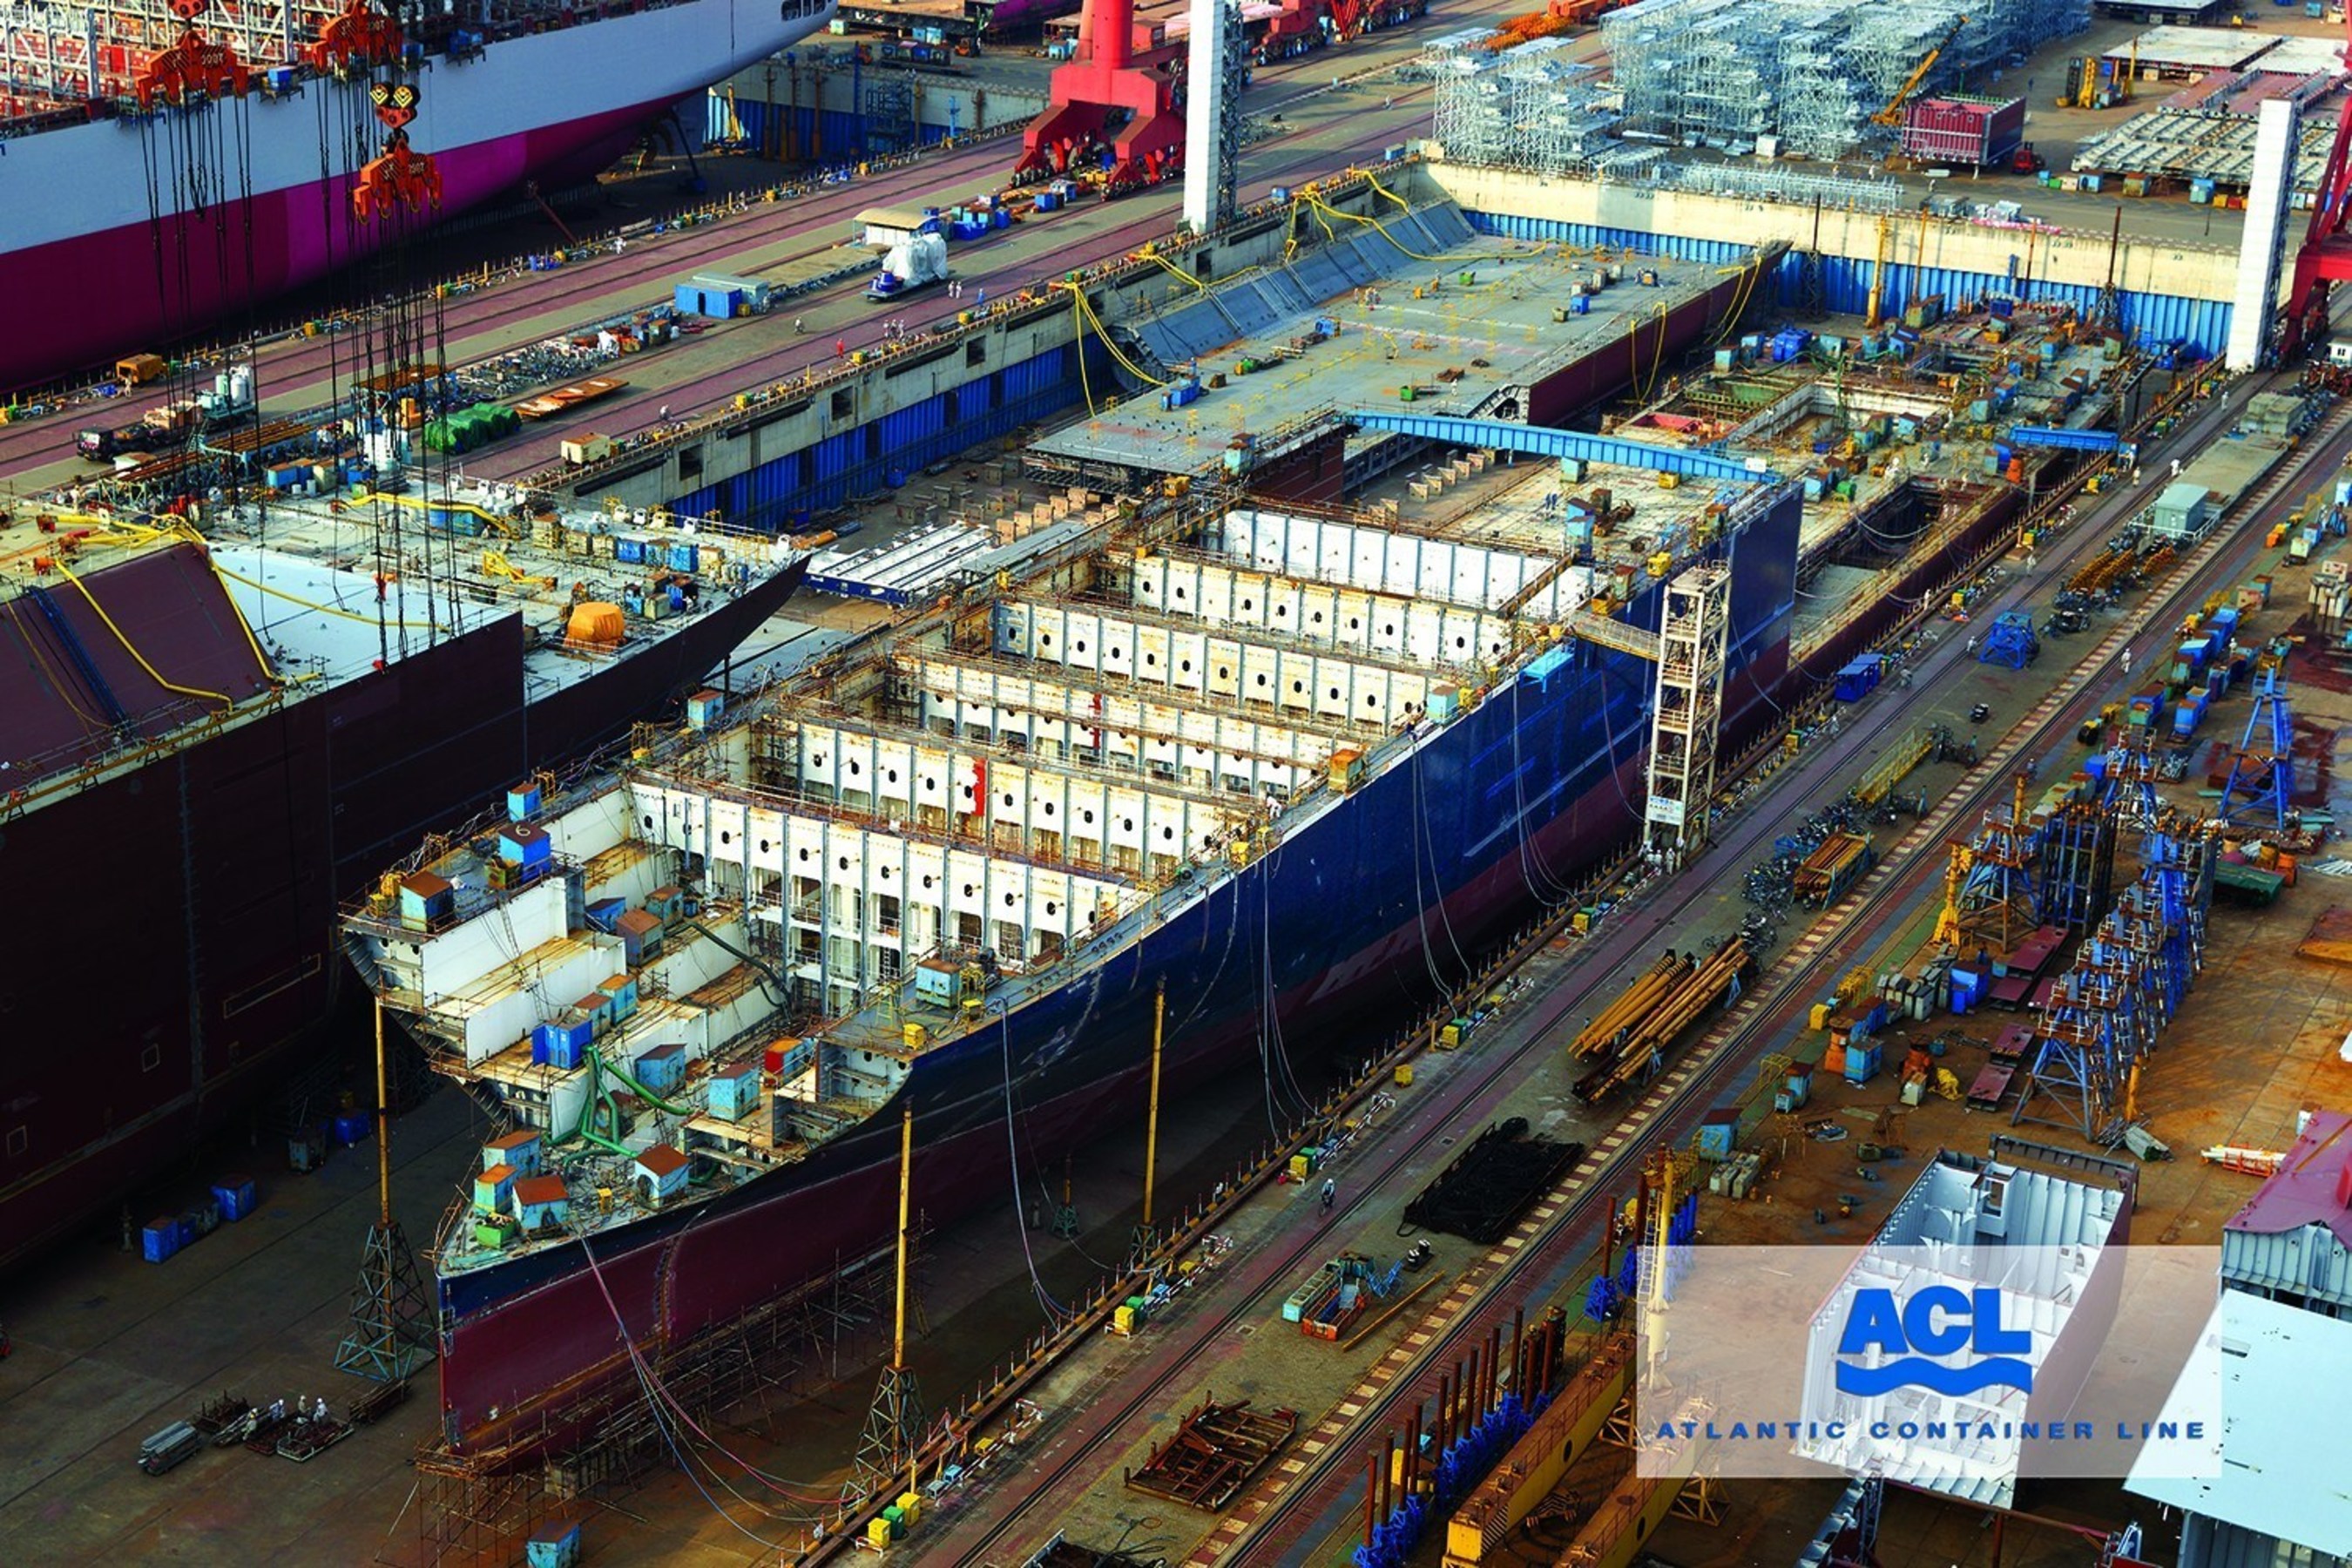 Construction is progressing on Atlantic Container Line's new G4 vessels, which will be the largest RORO/Containerships in the world. The new Generation 4 vessels will be bigger, faster, greener and more efficient than their predecessors. The G4's will have a container capacity of 3,800 TEUs plus 28,900 square meters of RORO space, with a car capacity of 1307 vehicles. The new ships will continue to employ cell-guides on deck, a feature that will allow ACL to extend its enviable record of never losing a...